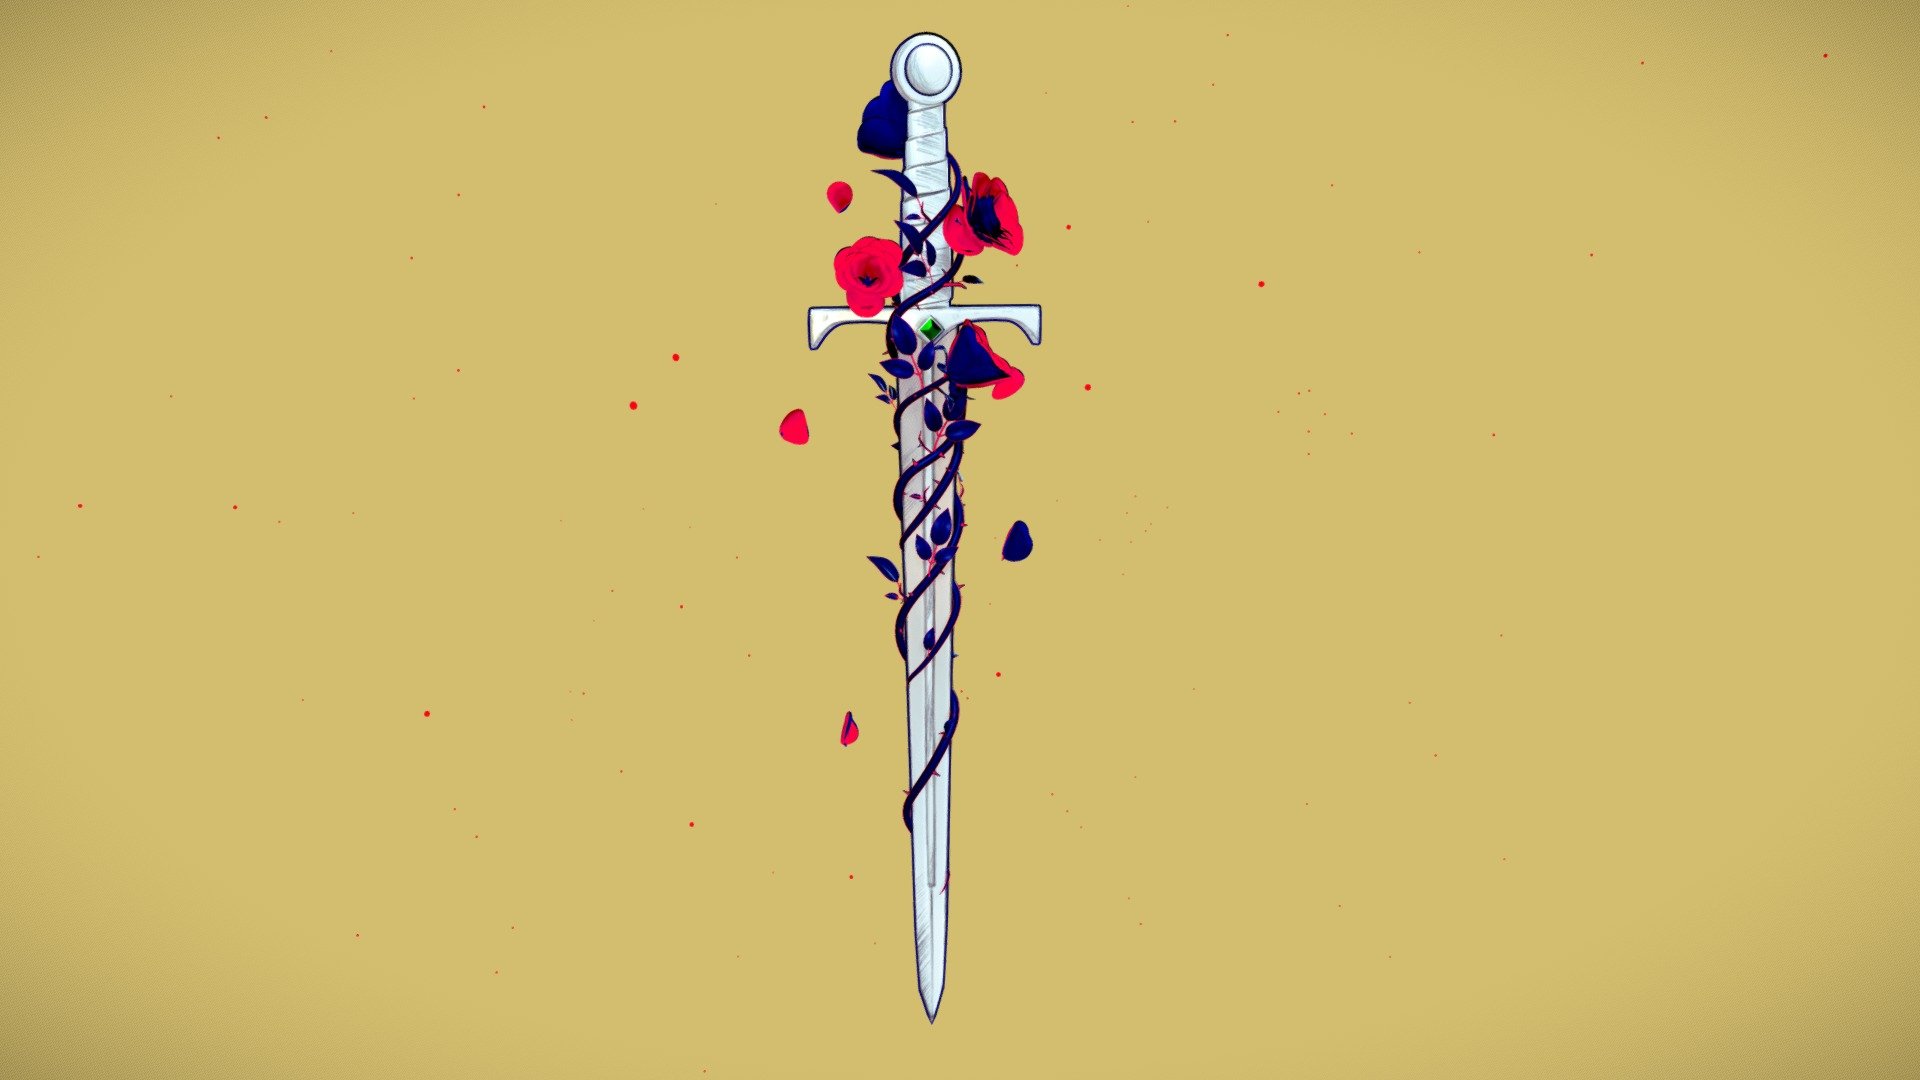 Another small personal project. I wanted to experiment more with the flat 2d stylized materials, mixing them with a texture drawn model (the sword). I think the result came out quite nice, let see where this will take me next :) The idea came from an old tattoo concept I saw once 3d model